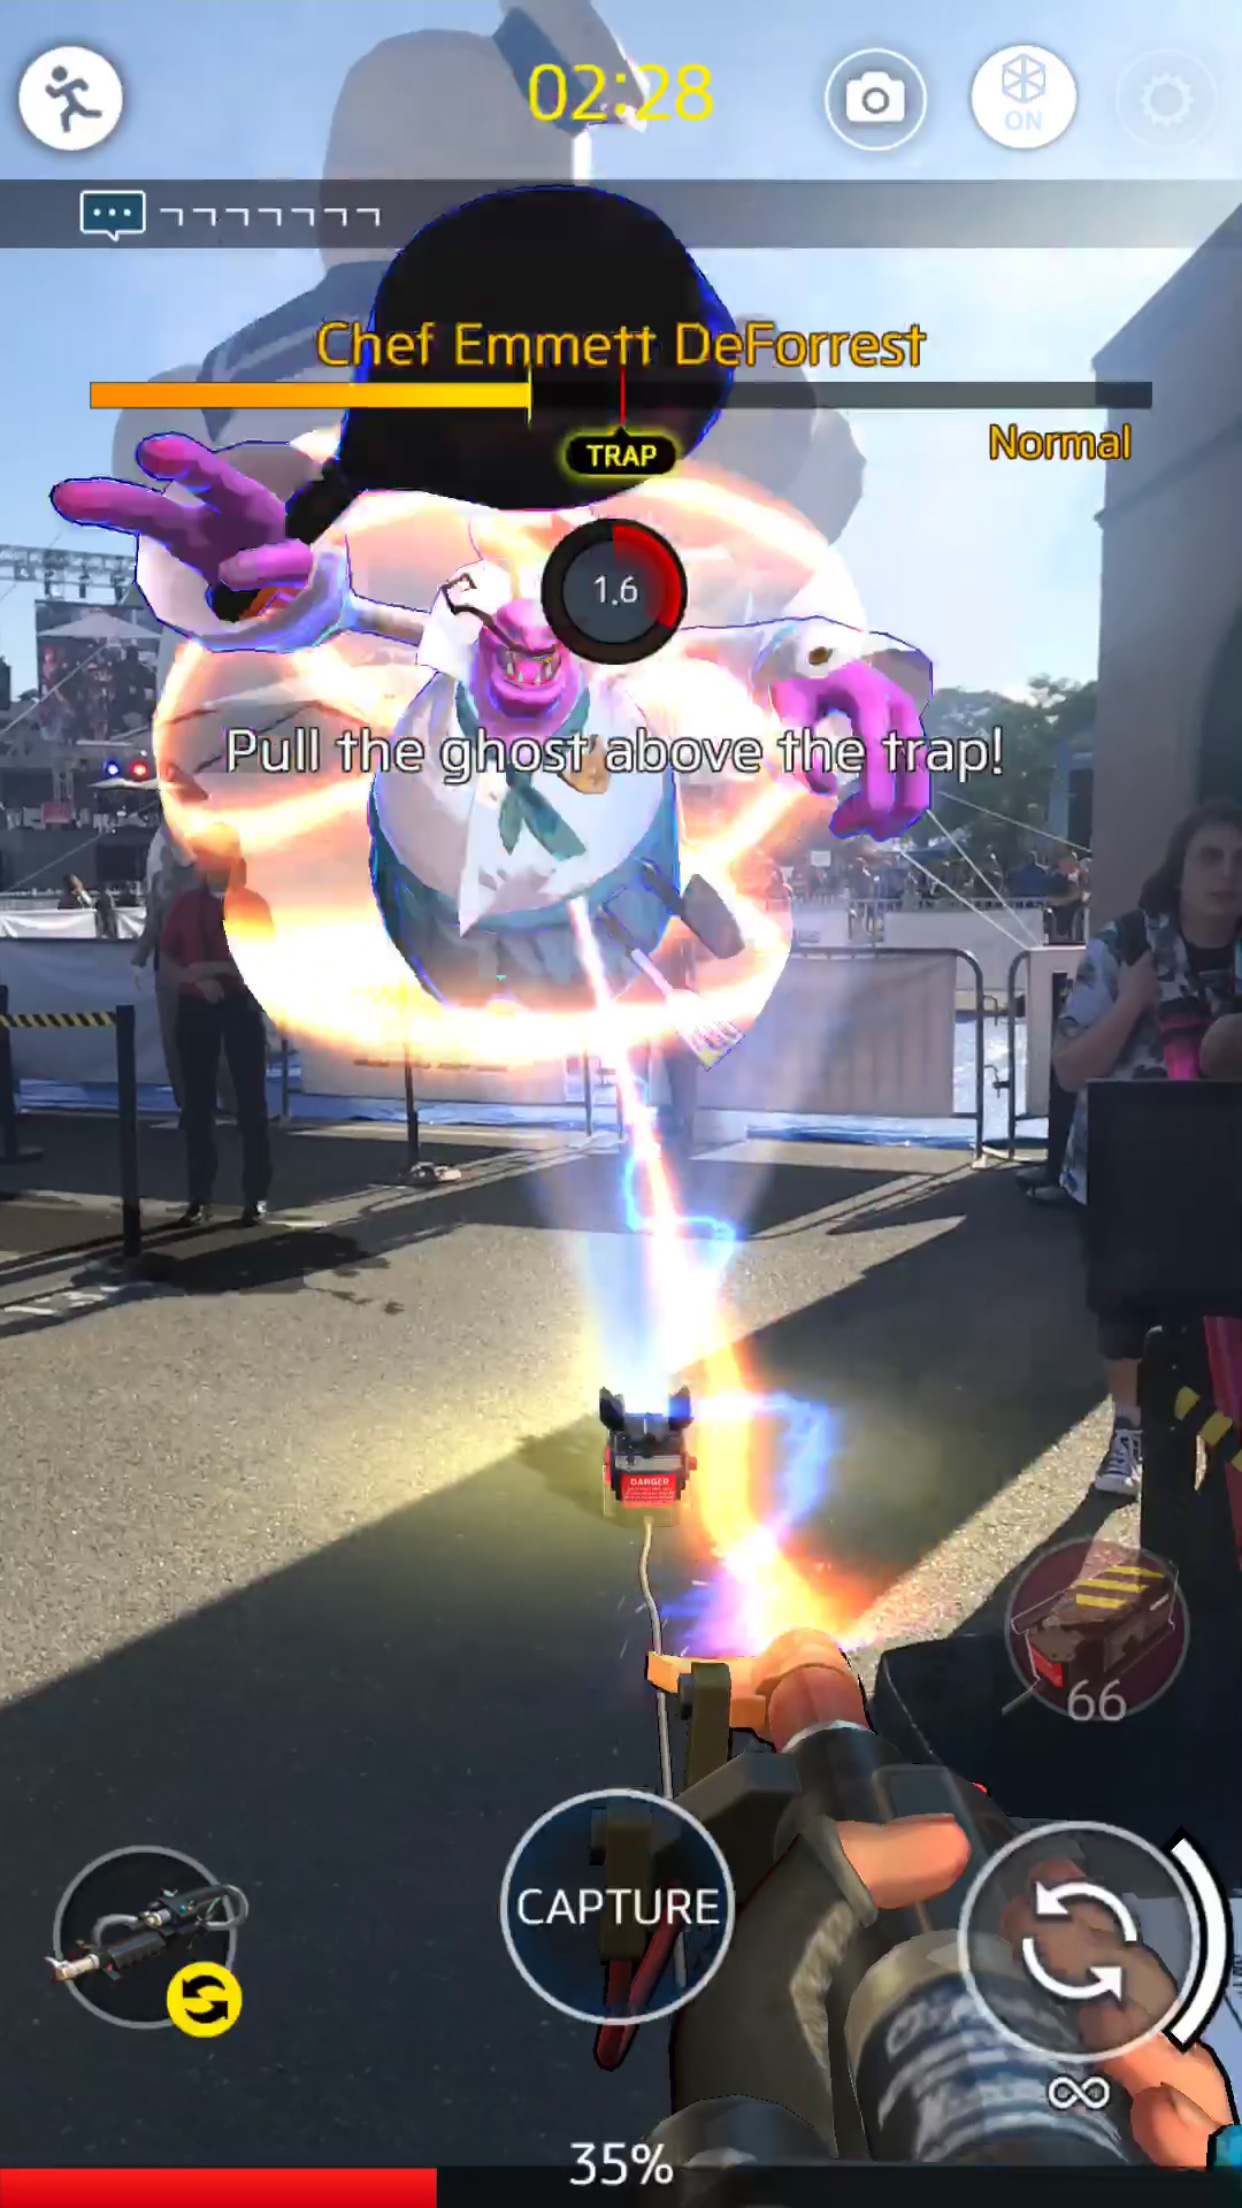 Ghostbusters World Mobile Game Evolves Beyond Another Pokémon Go Copycat